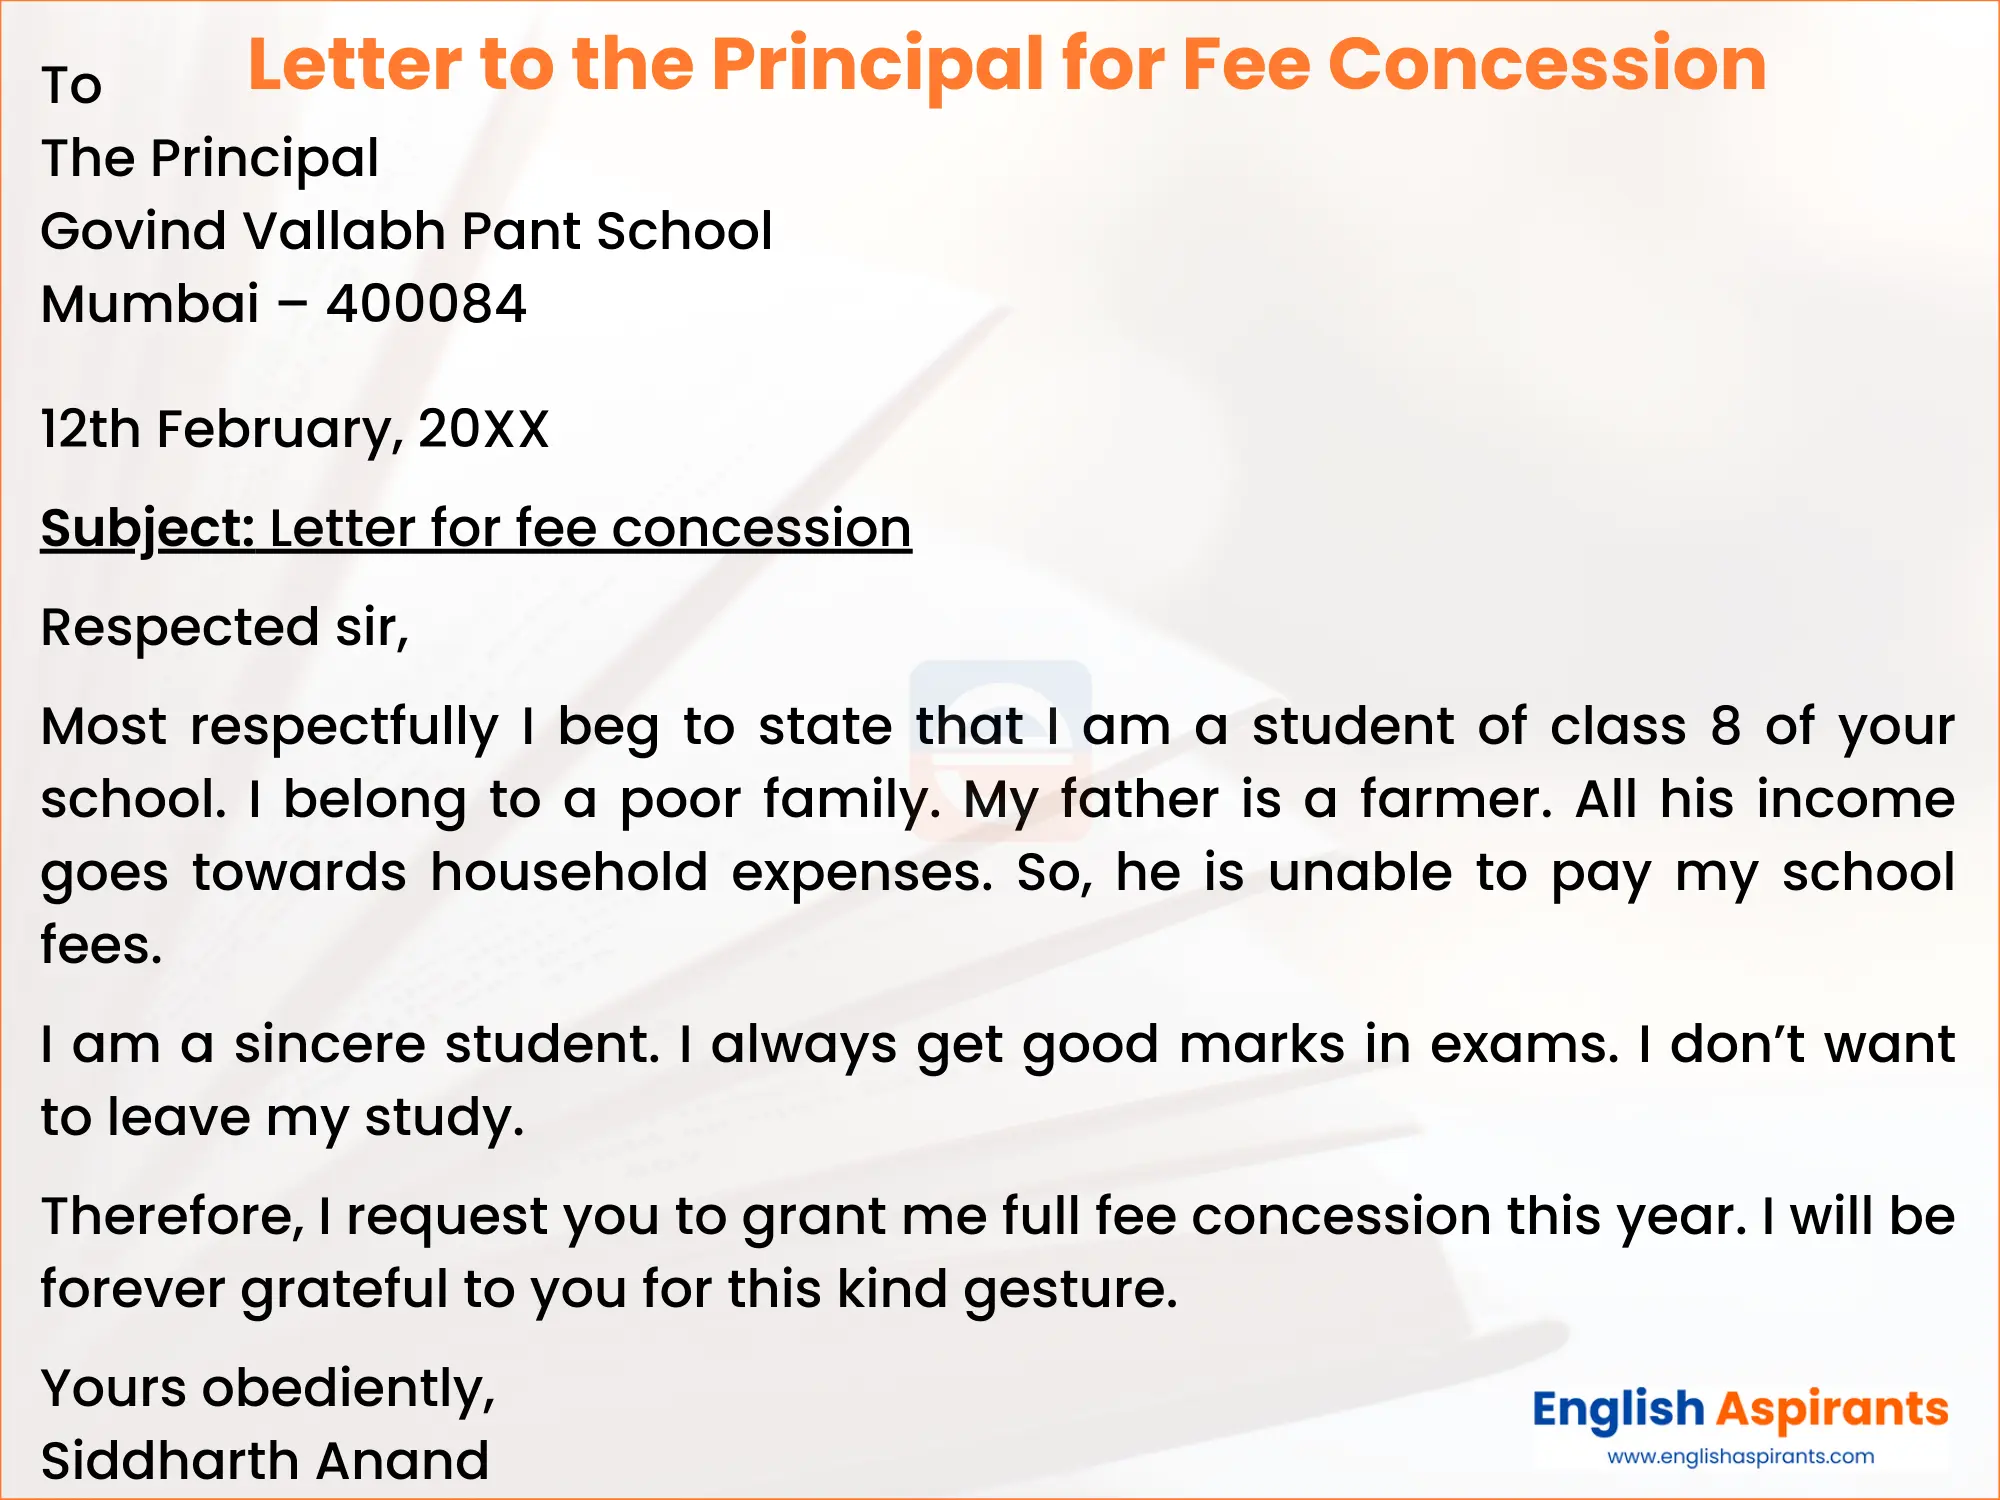 Letter to principal for fee concession